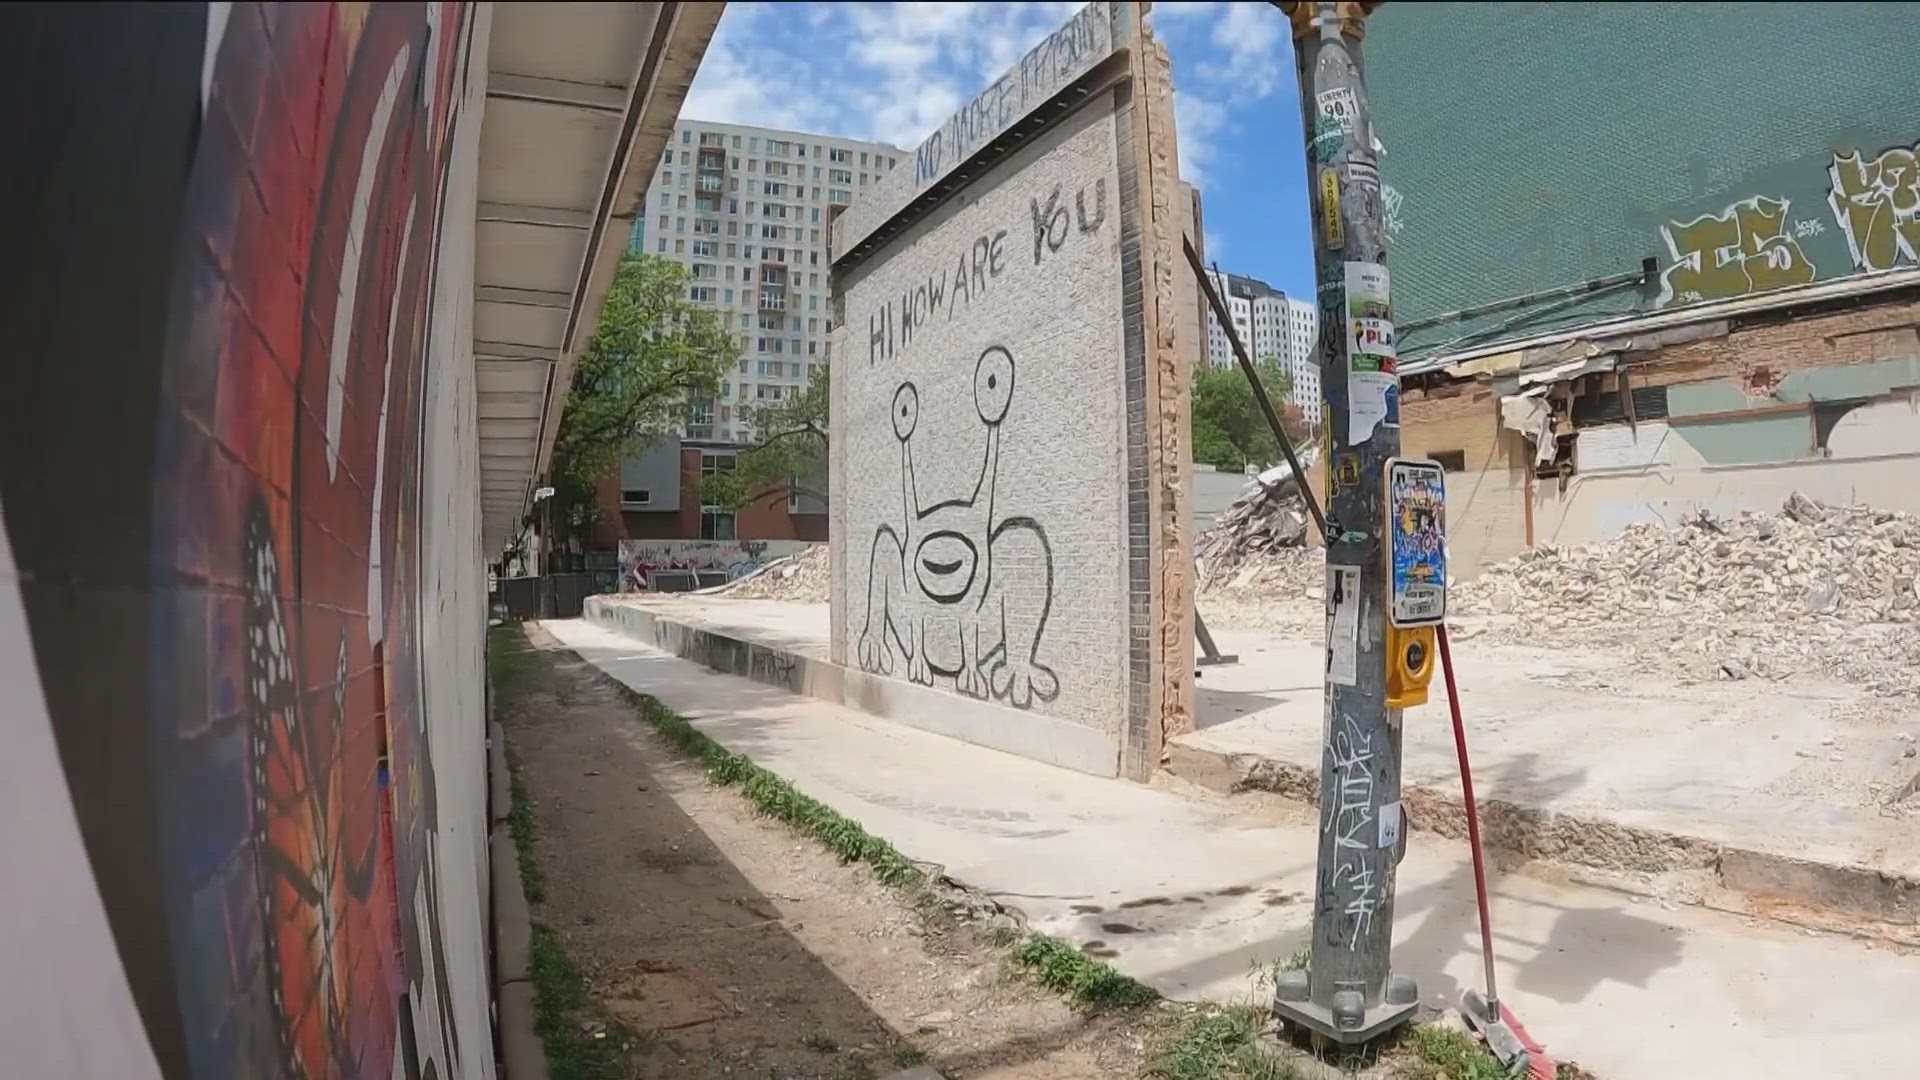 Bulldozers knocked down a building that featured one of Austin's most famous murals. But the art is still standing on the corner of Guadalupe and 21st streets.